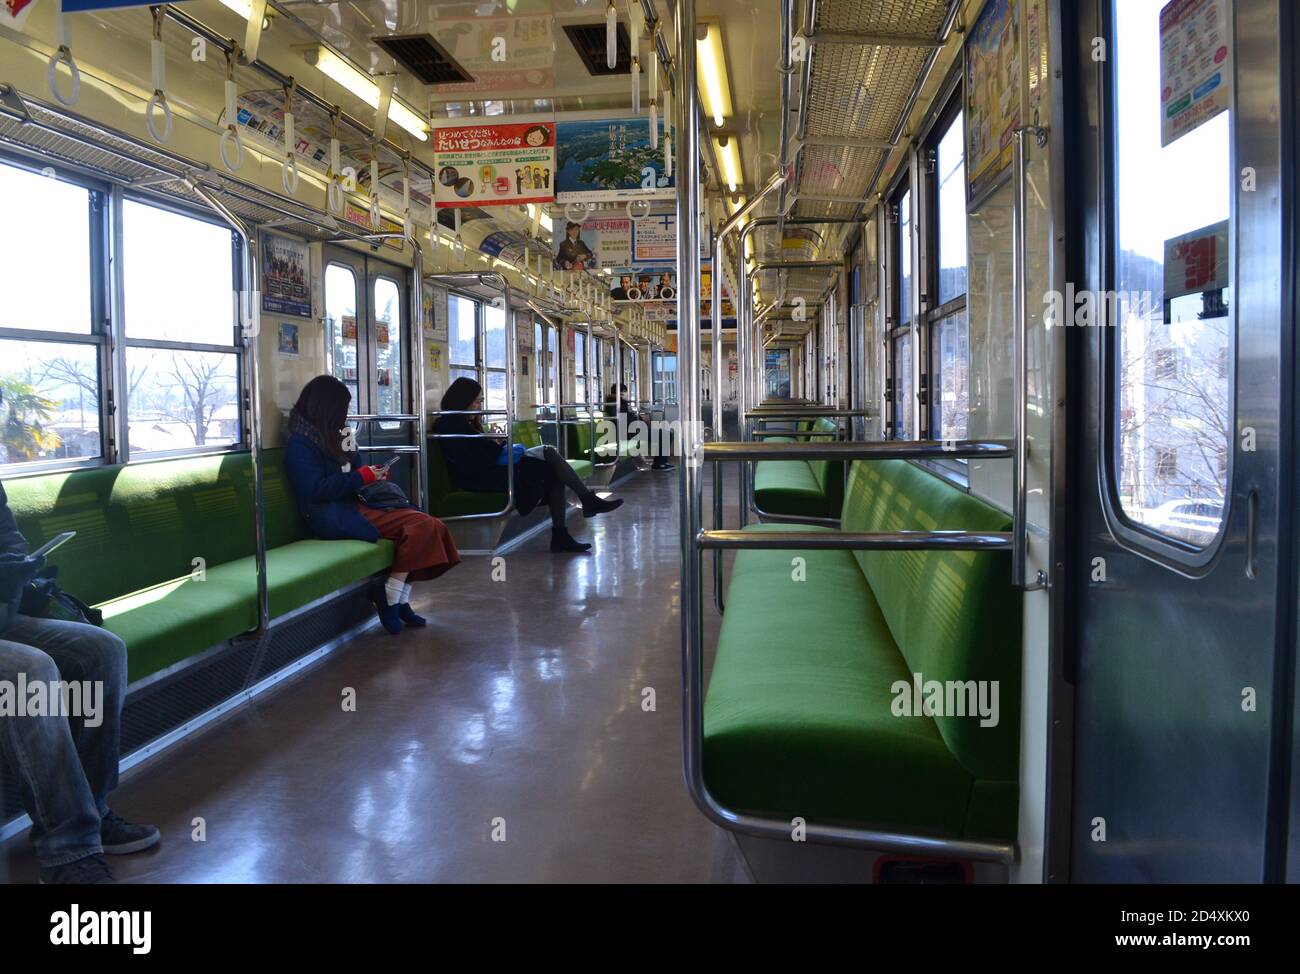 Itasbashi, Japan-2/25/16: Inside a semi-empty local Japanese train traveling from Itabashi; the passengers sit far apart on the green seating. Stock Photo